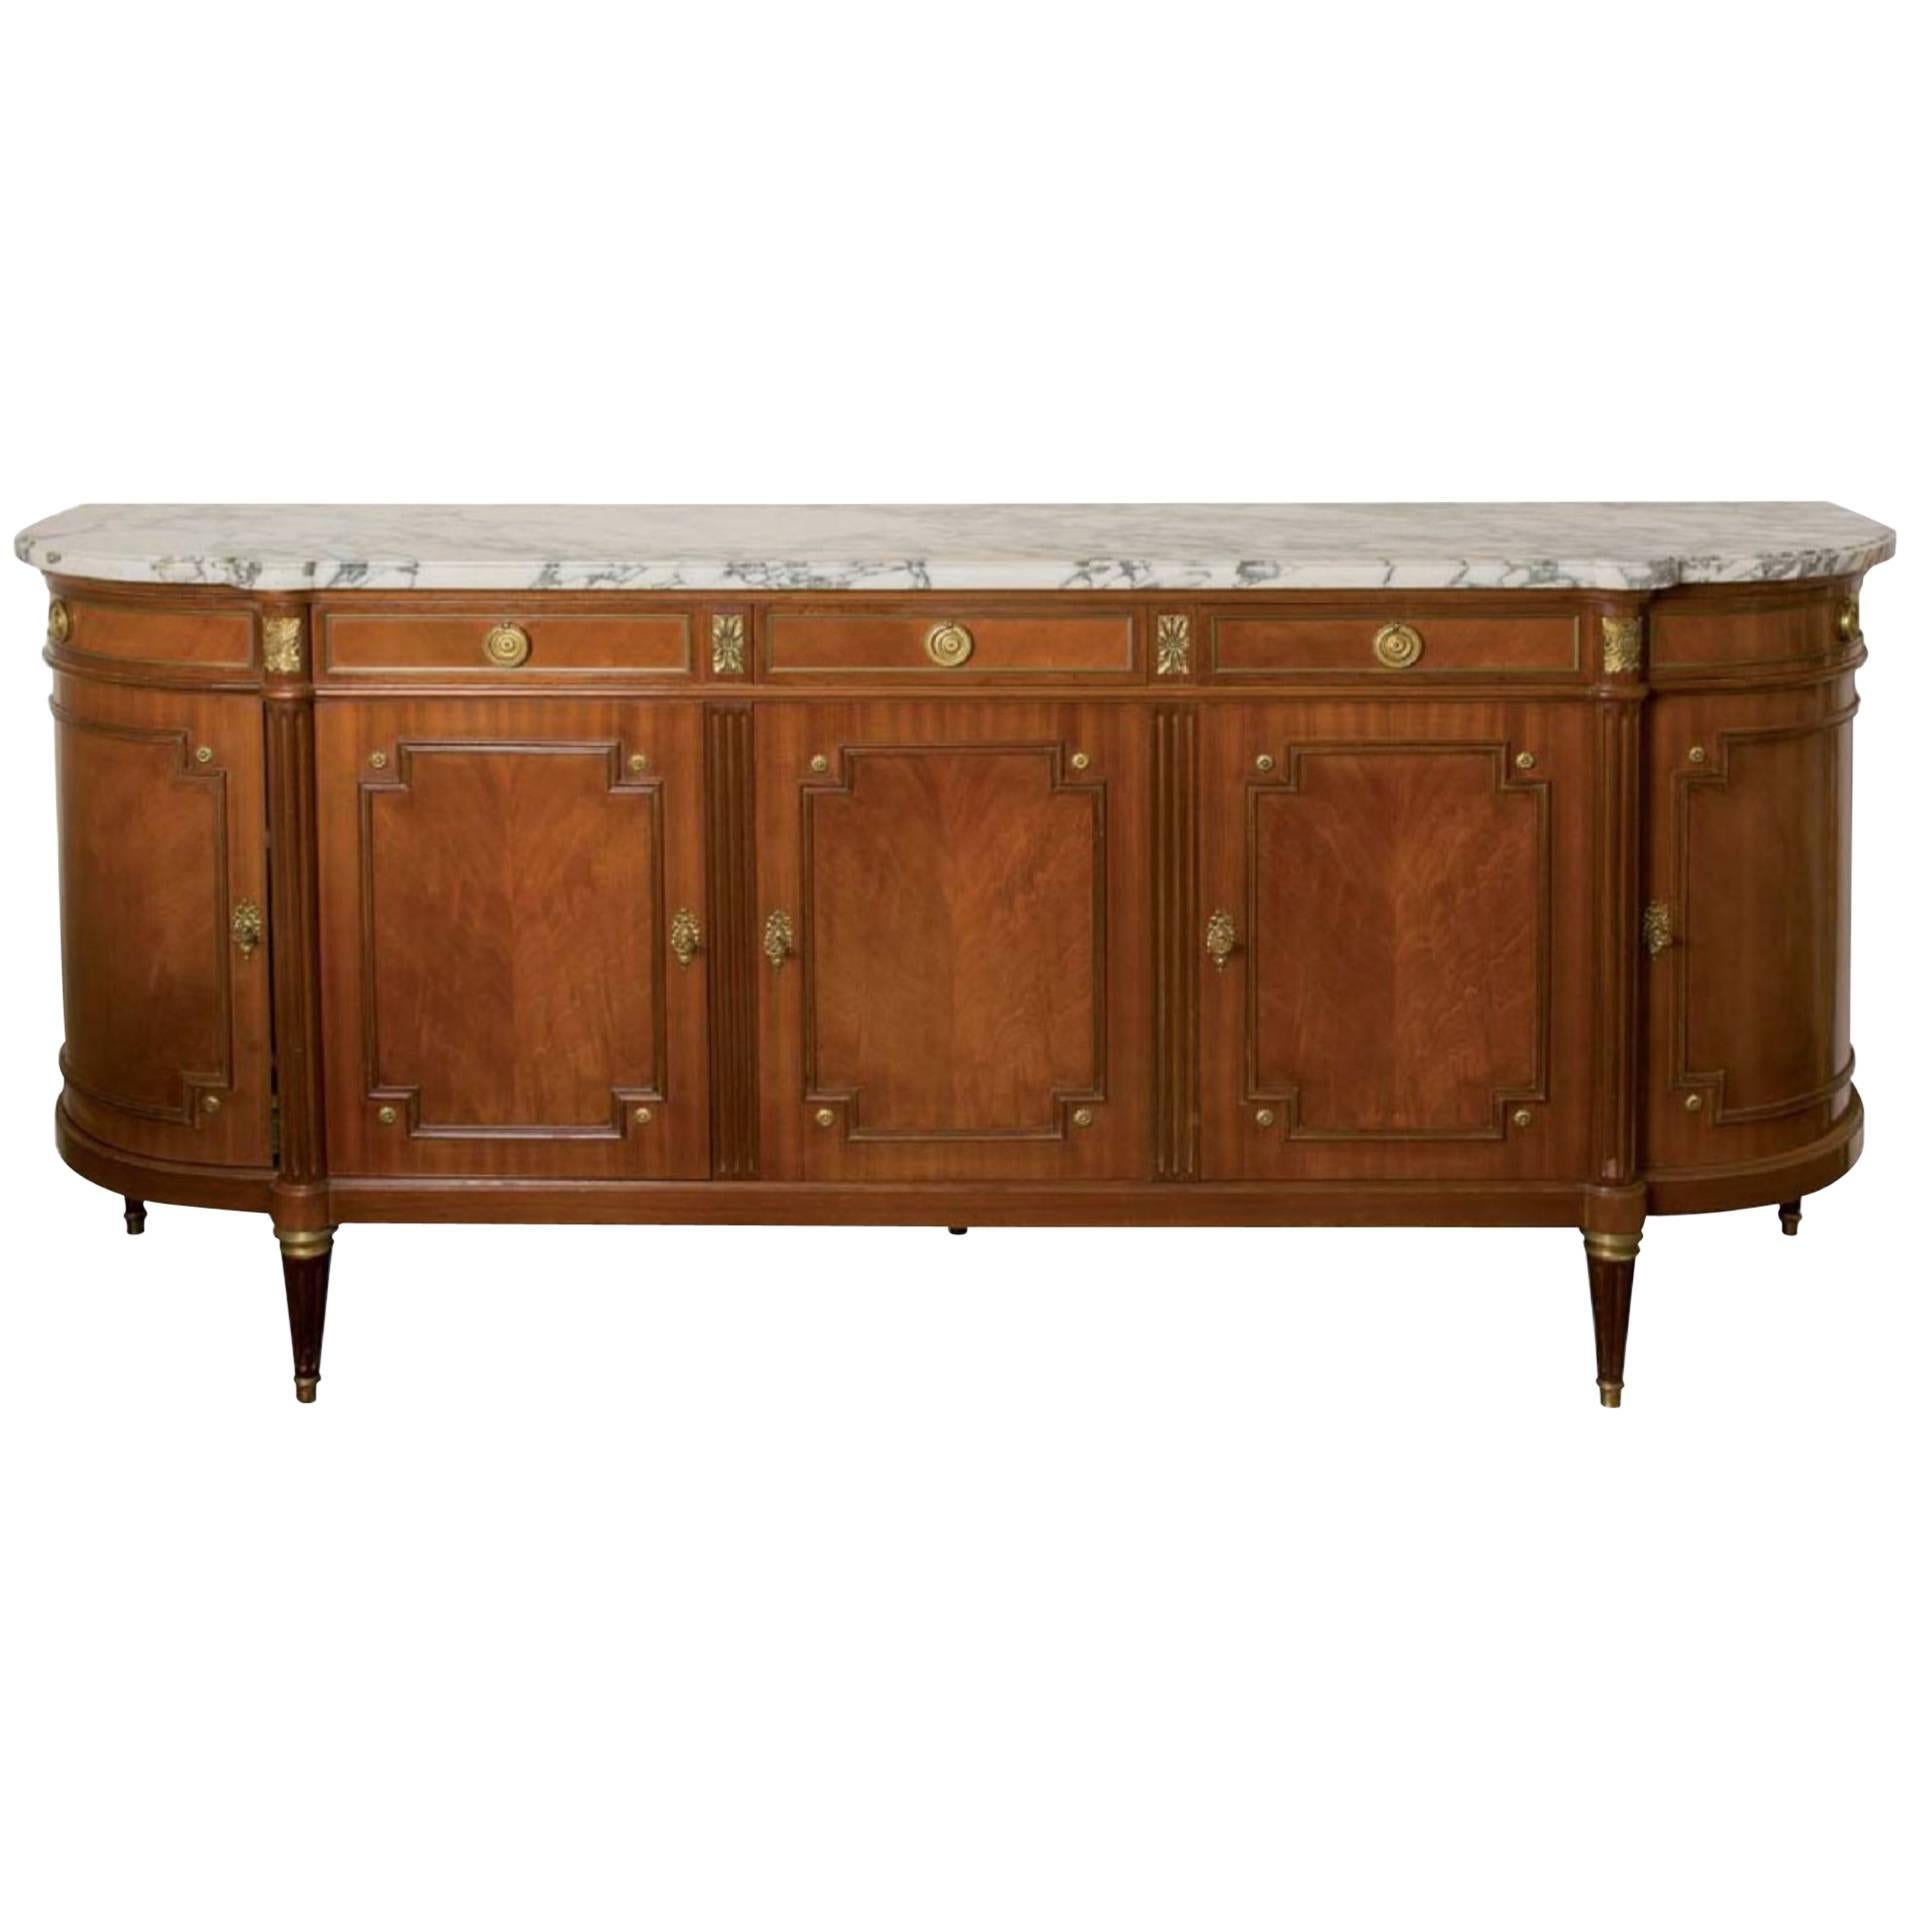 19th Century French Mahogany Marble-Top Buffet in Louis XVI Style